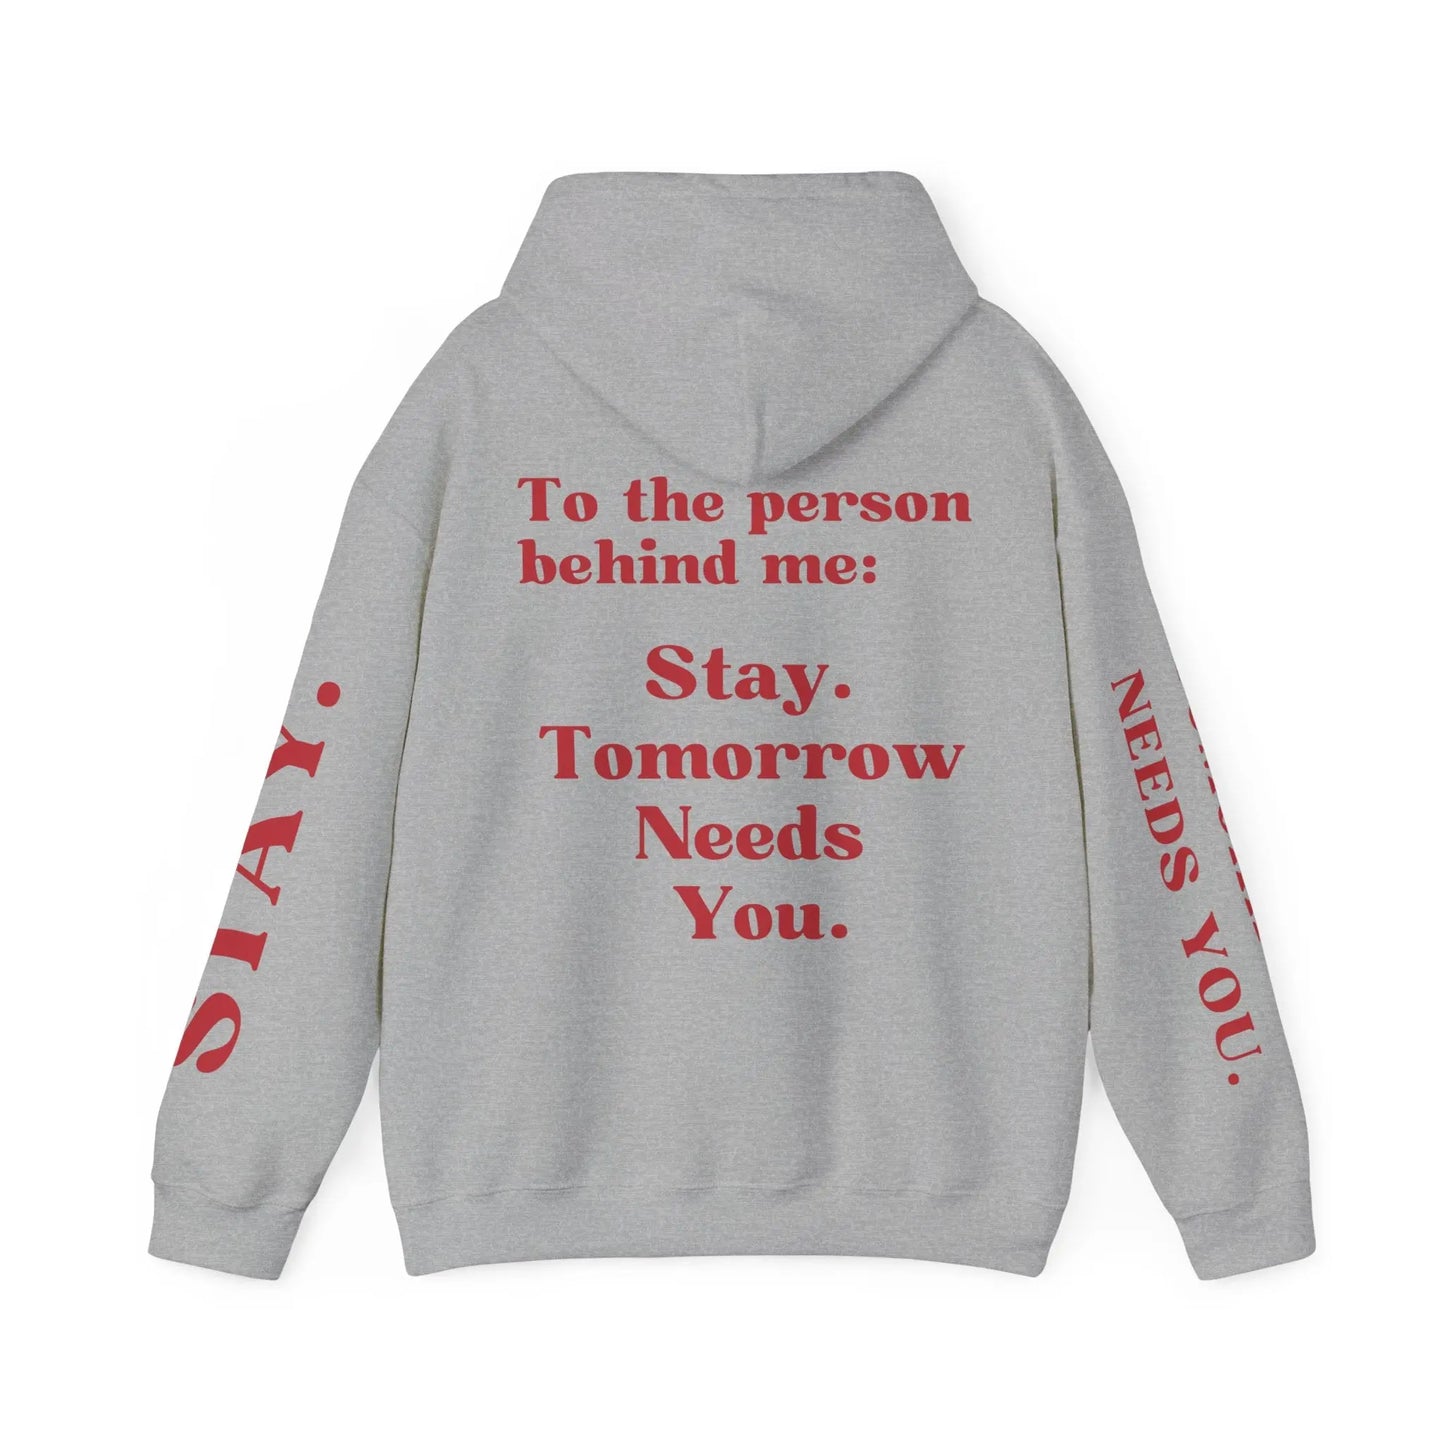 To The Person Behind Me: "Stay Tomorrow Needs You" Hooded Sweatshirt Mental Health Awareness Suicide Prevention Mothers Day Fathers Day Gift Veterans Support Military Gift